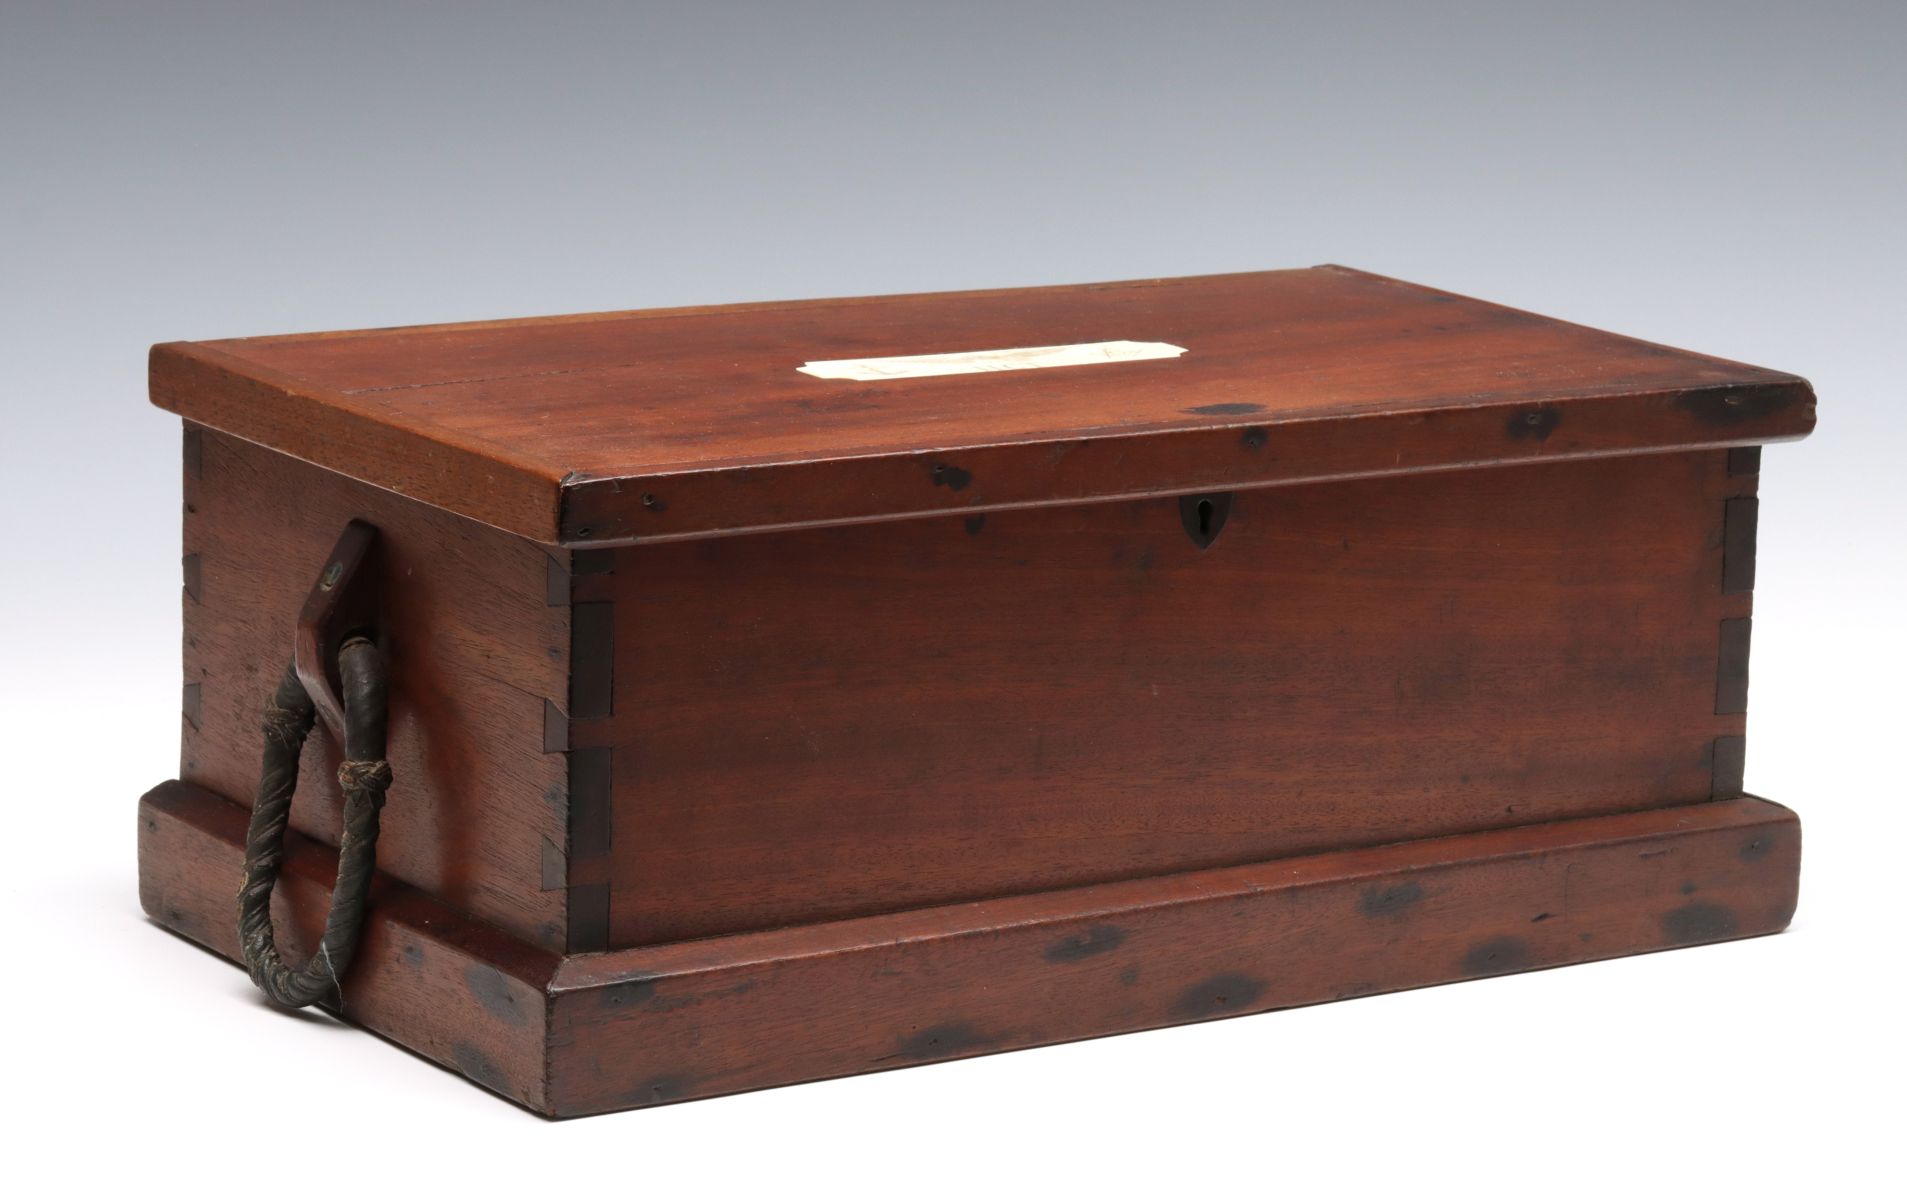 A 19TH C. INLAID WALNUT SAILOR'S BOX WITH ROPE BECKETS